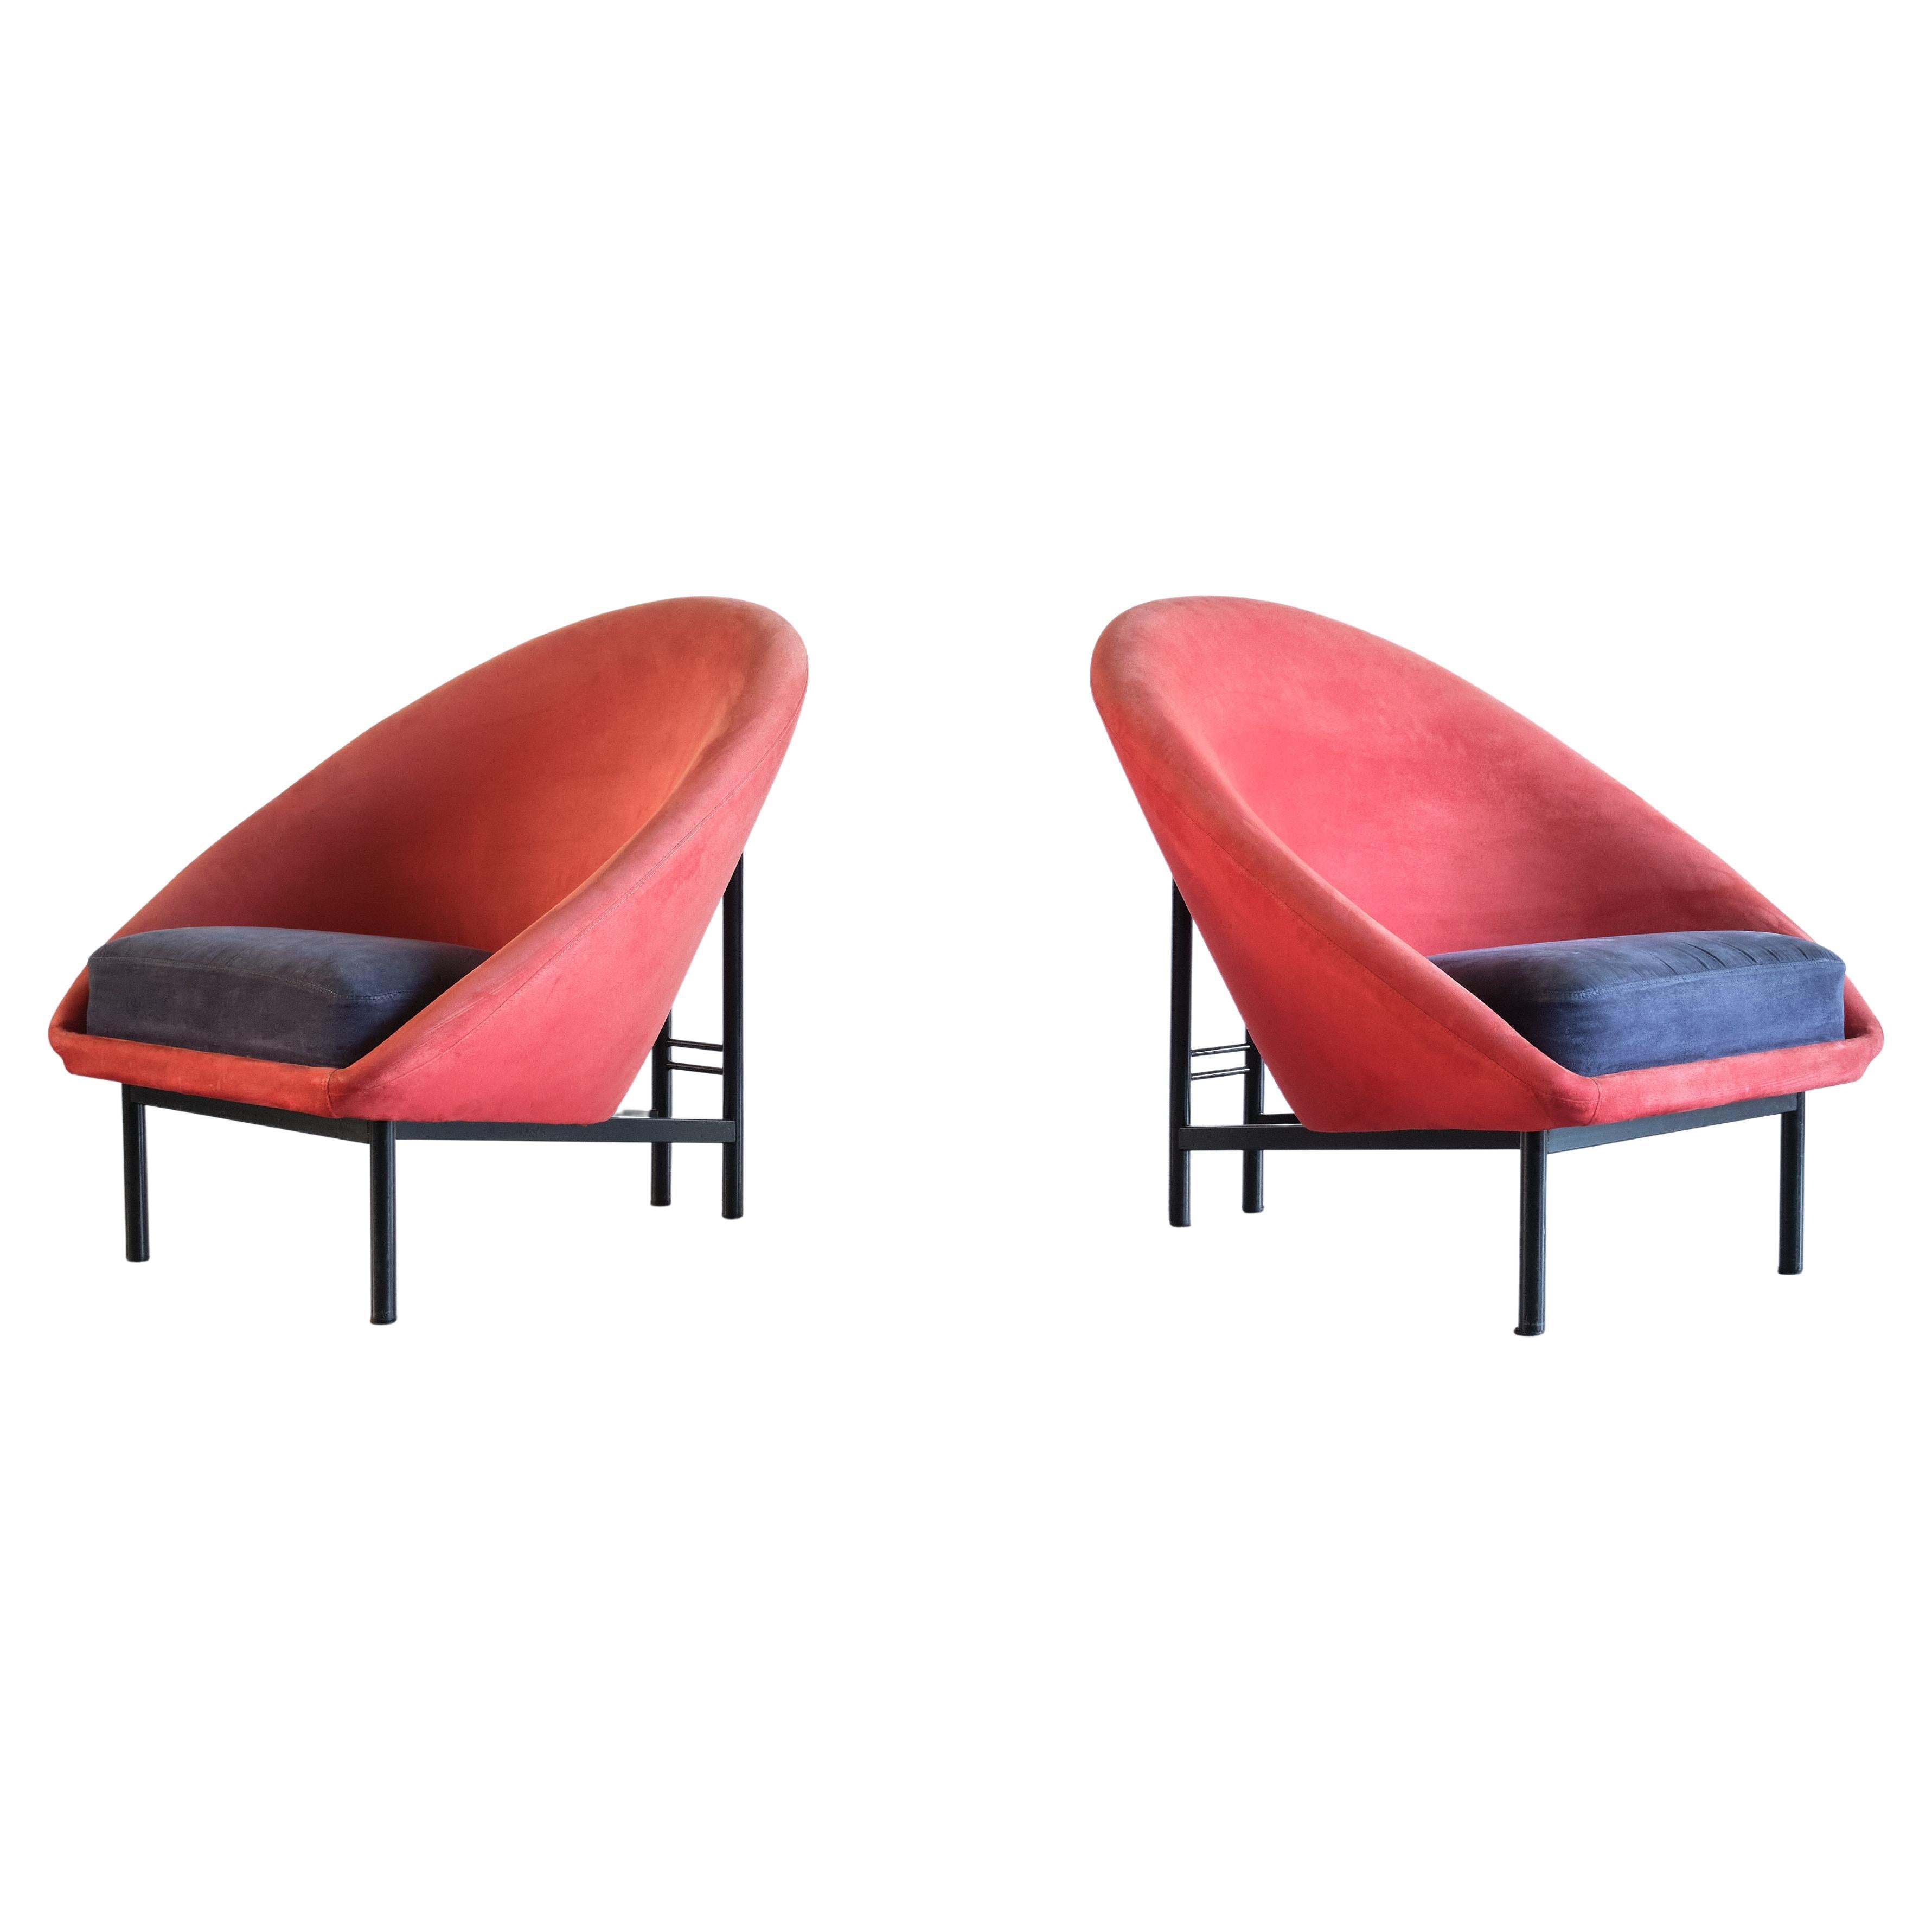 Pair of Theo Ruth 'F815' Lounge Chairs, Artifort, Netherlands, 1960s For Sale